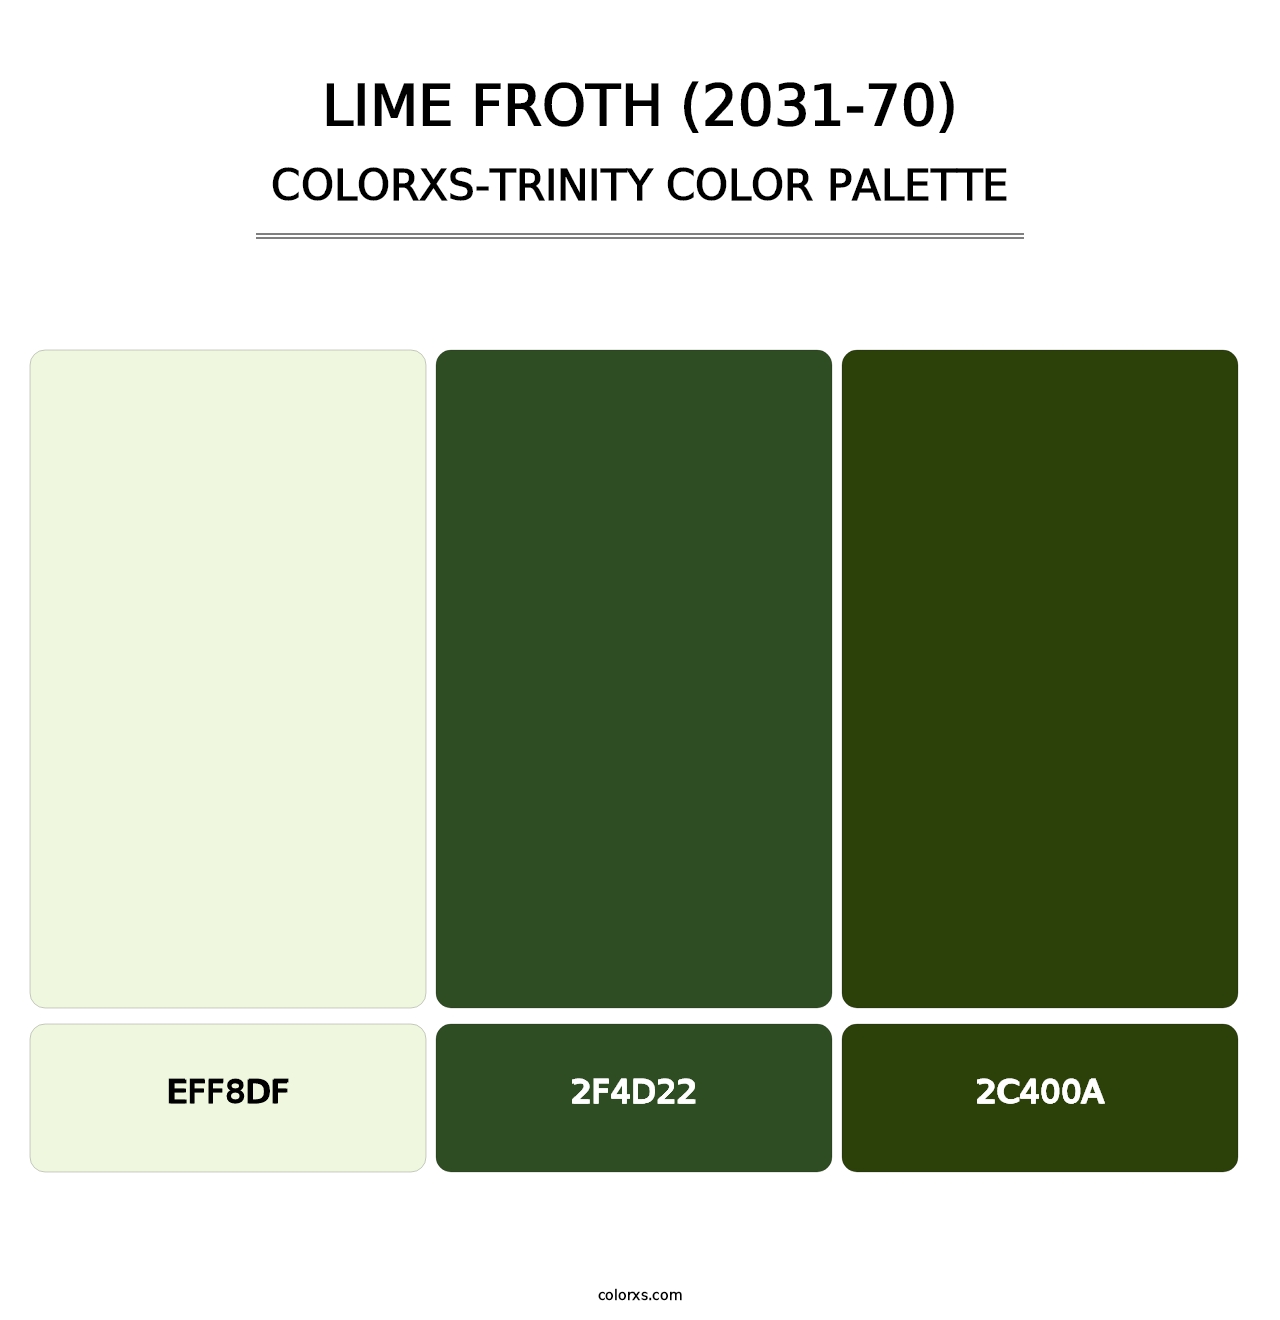 Lime Froth (2031-70) - Colorxs Trinity Palette